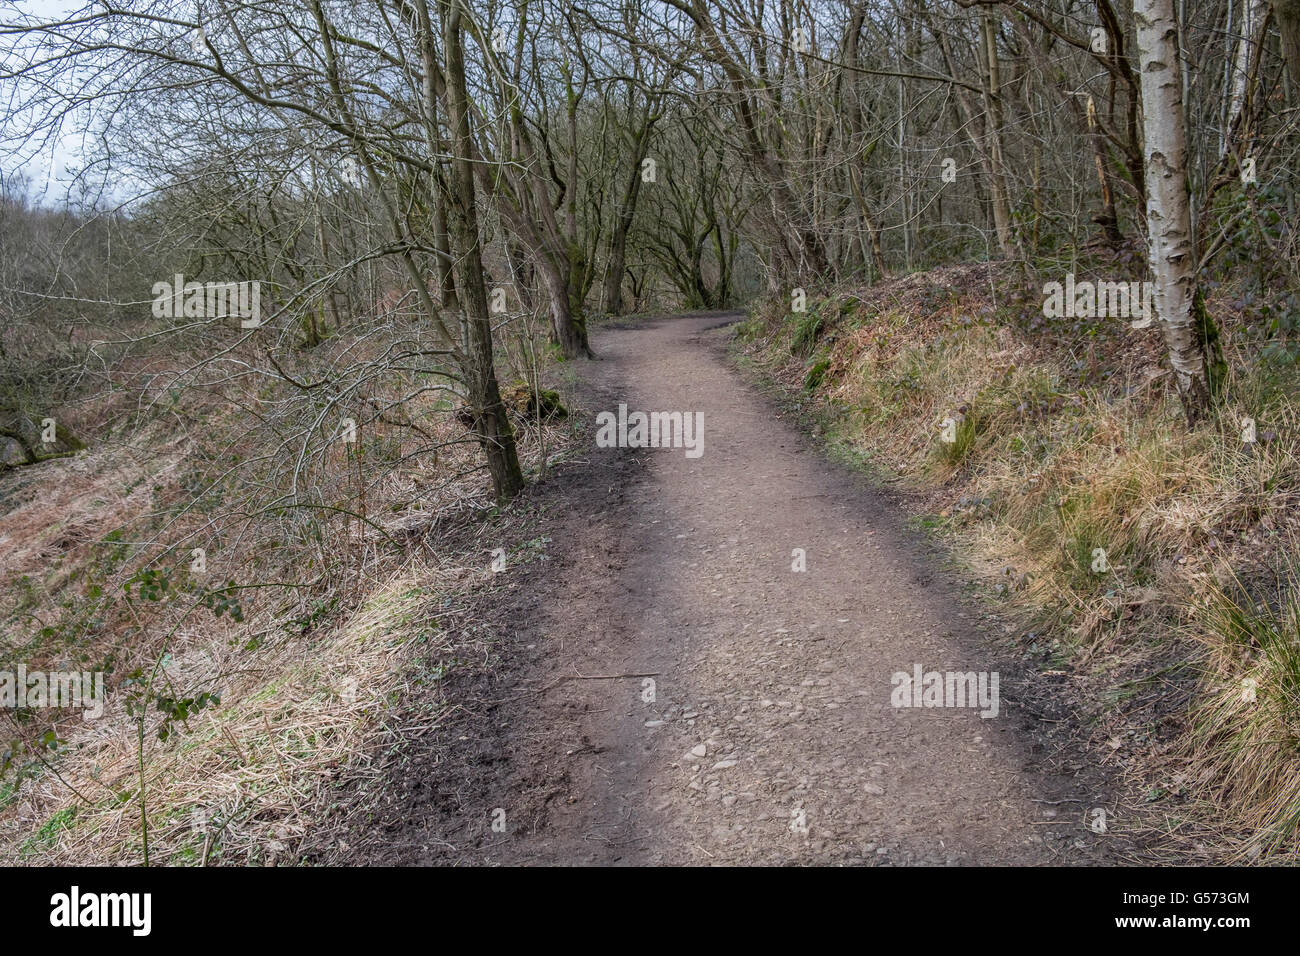 A muddy footpath leading through a small forest Stock Photo